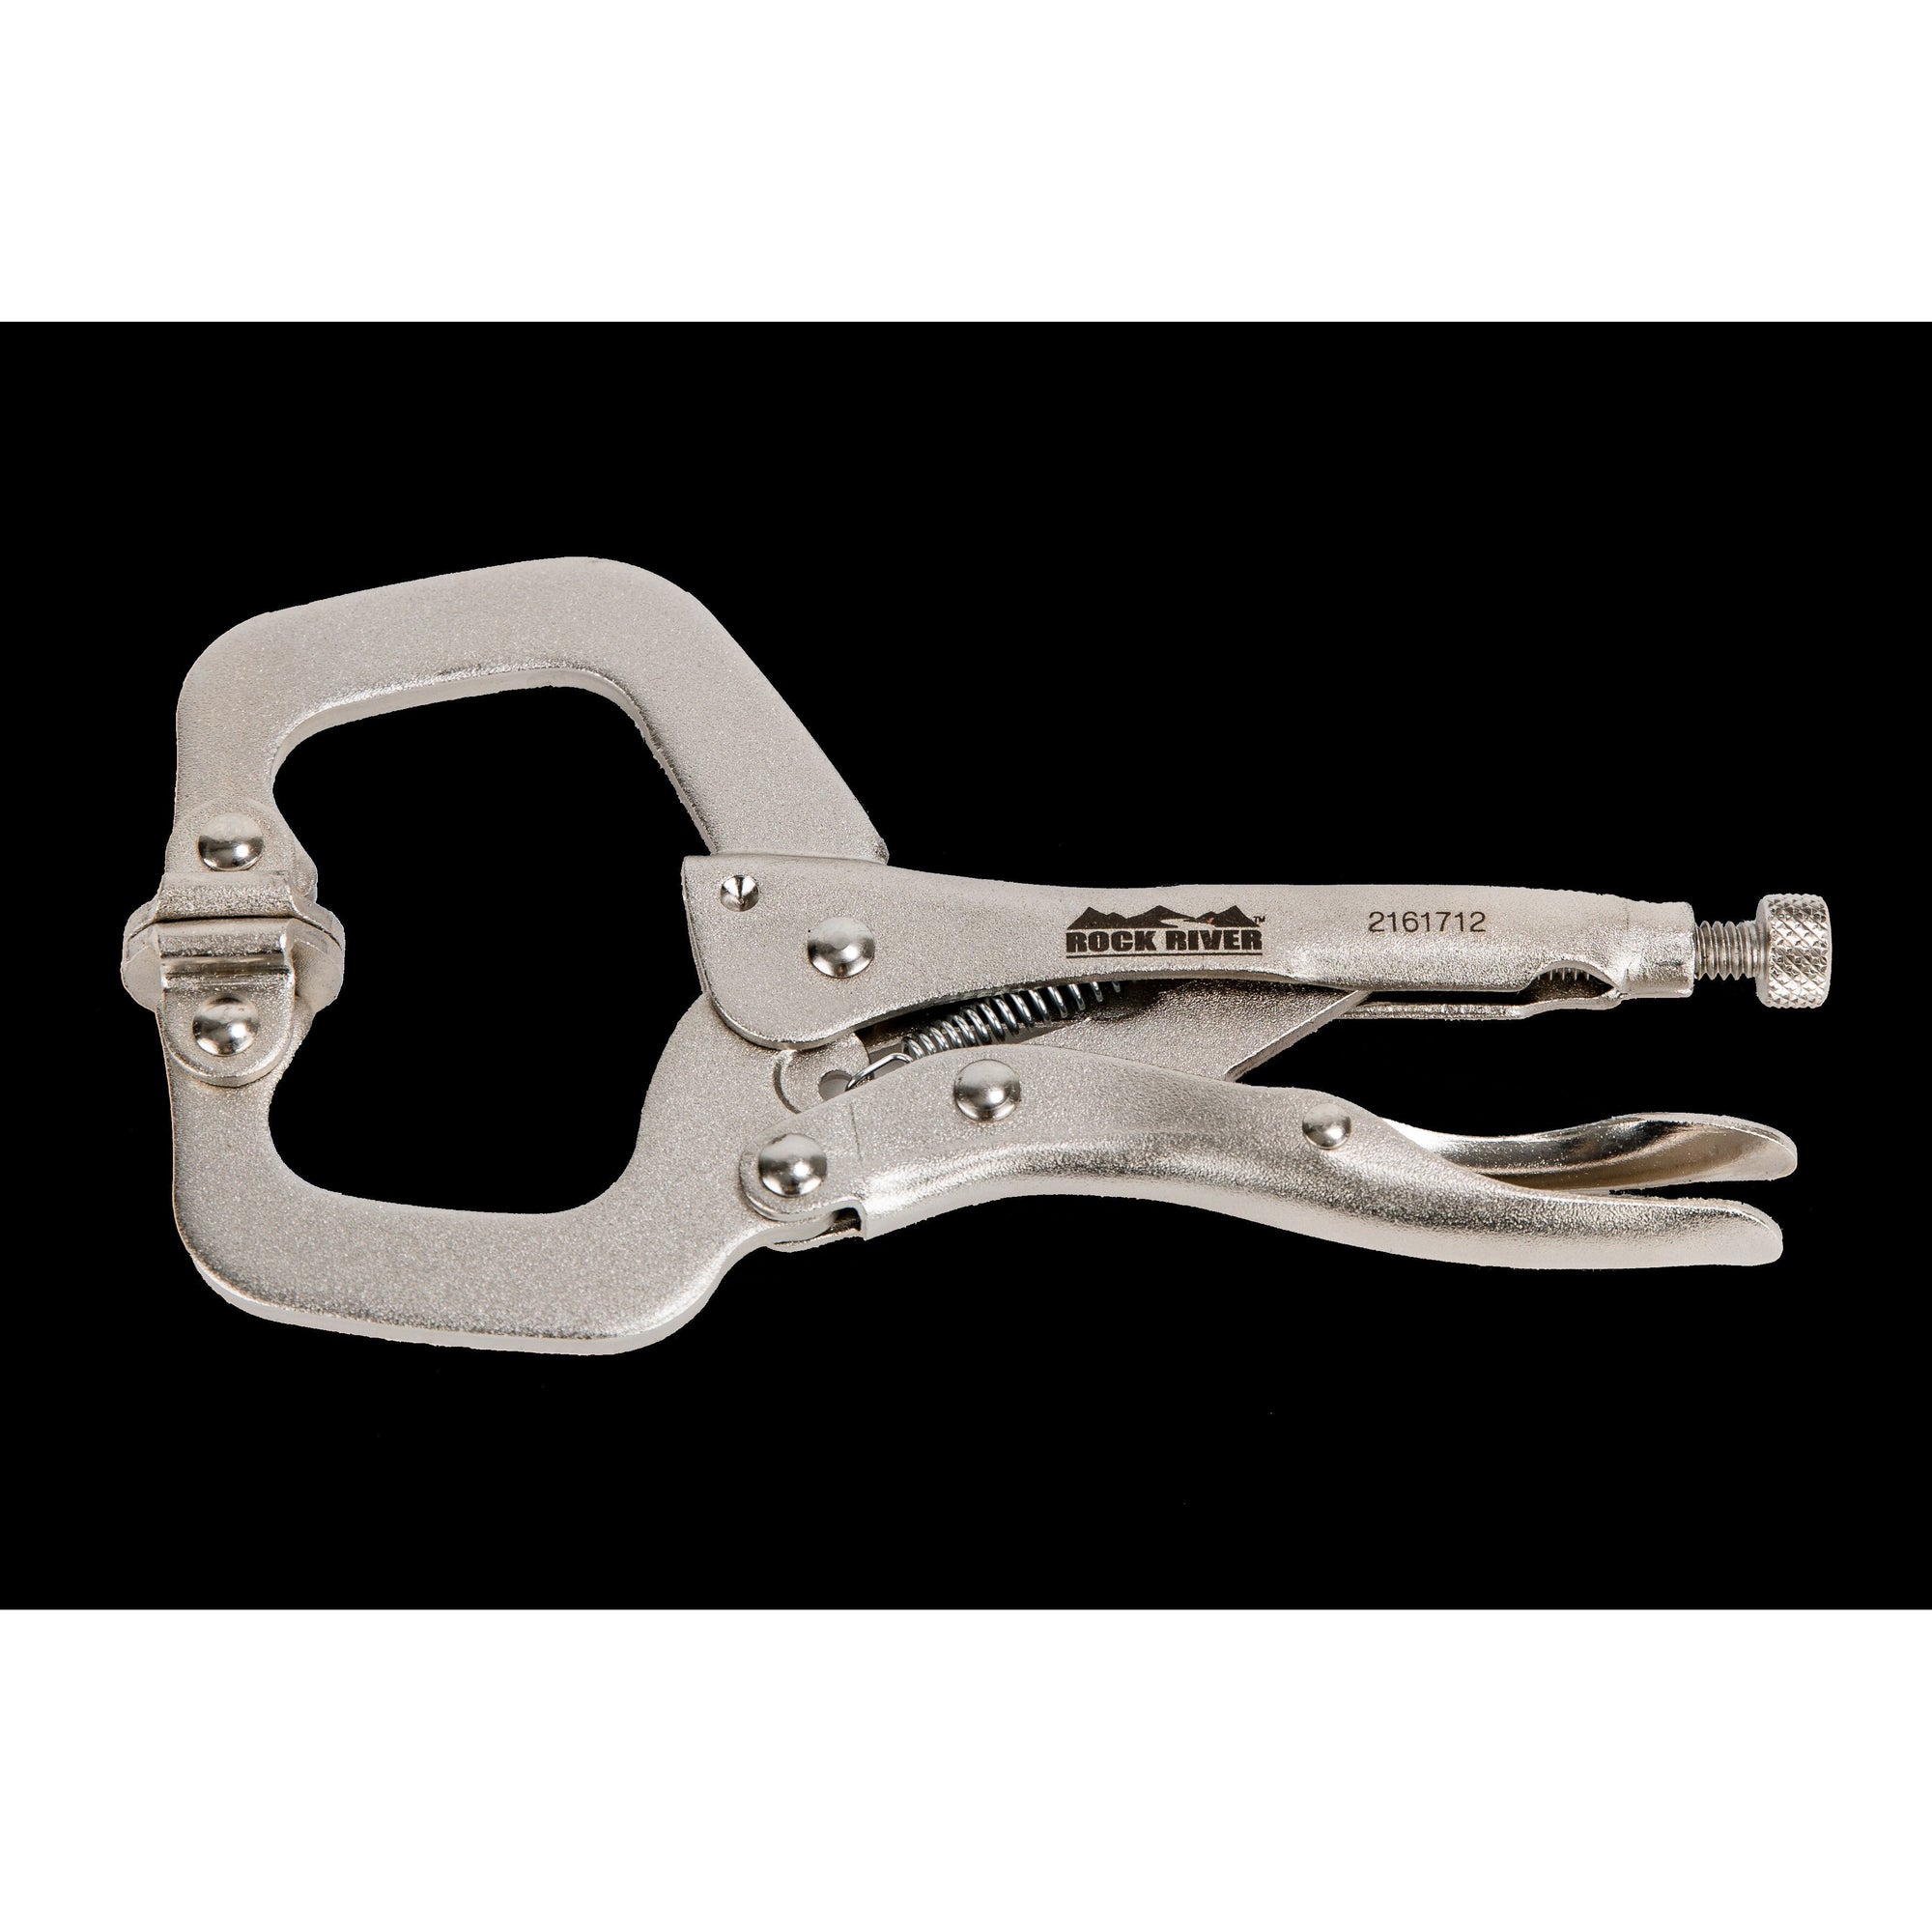 Clamps - 6" Nickel Plated C-Clamps Locking Pliers With Pads - Rock River